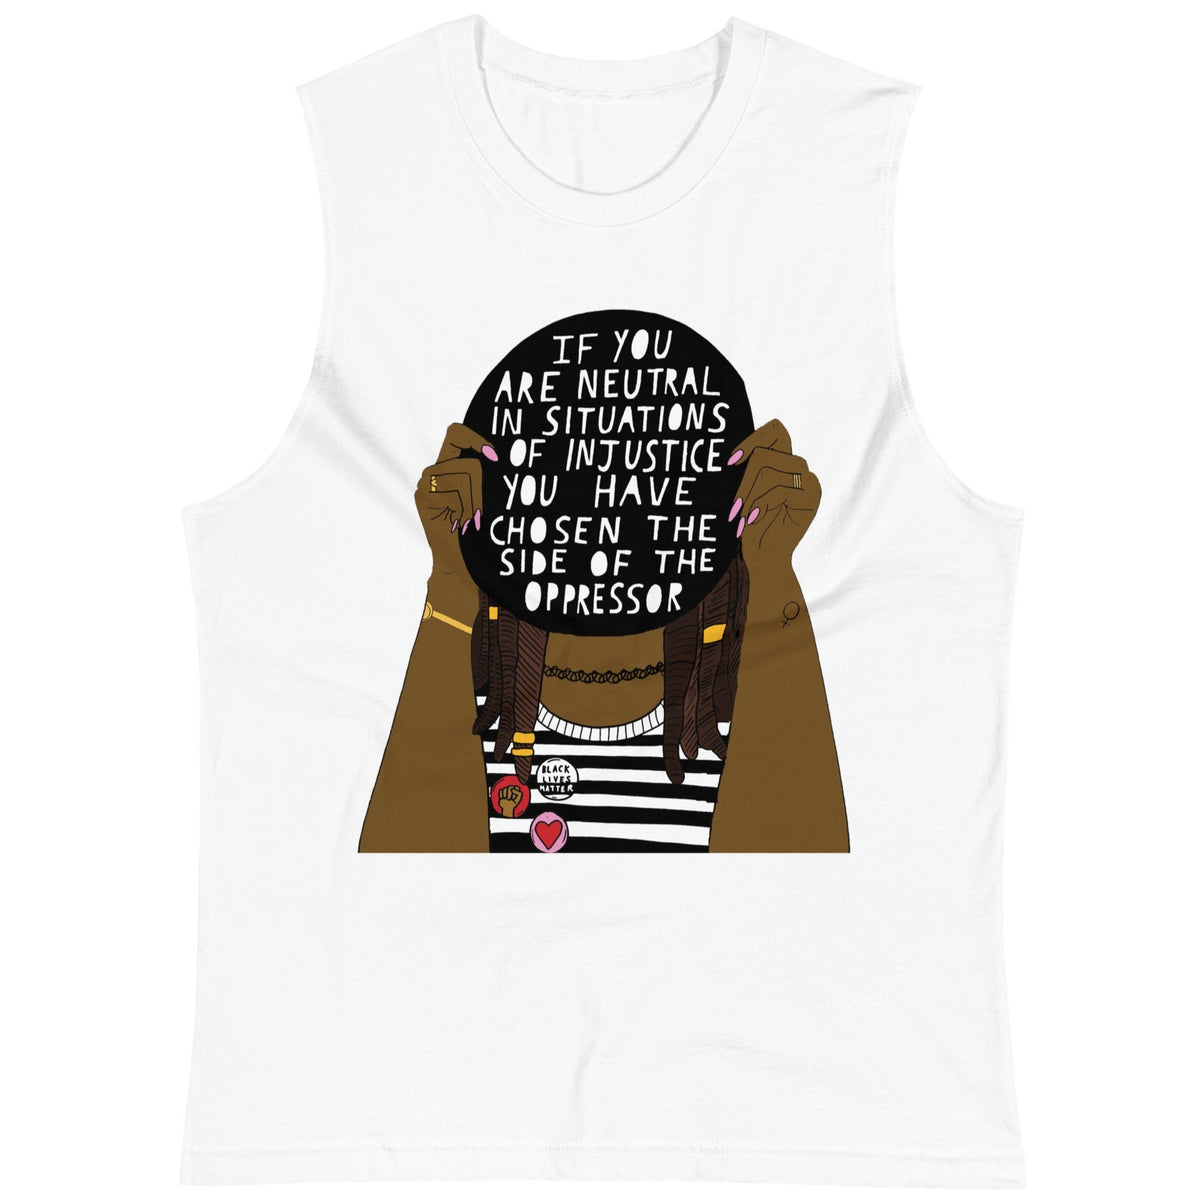 If You Are Neutral In Situations Of Injustice... -- Unisex Tanktop ...